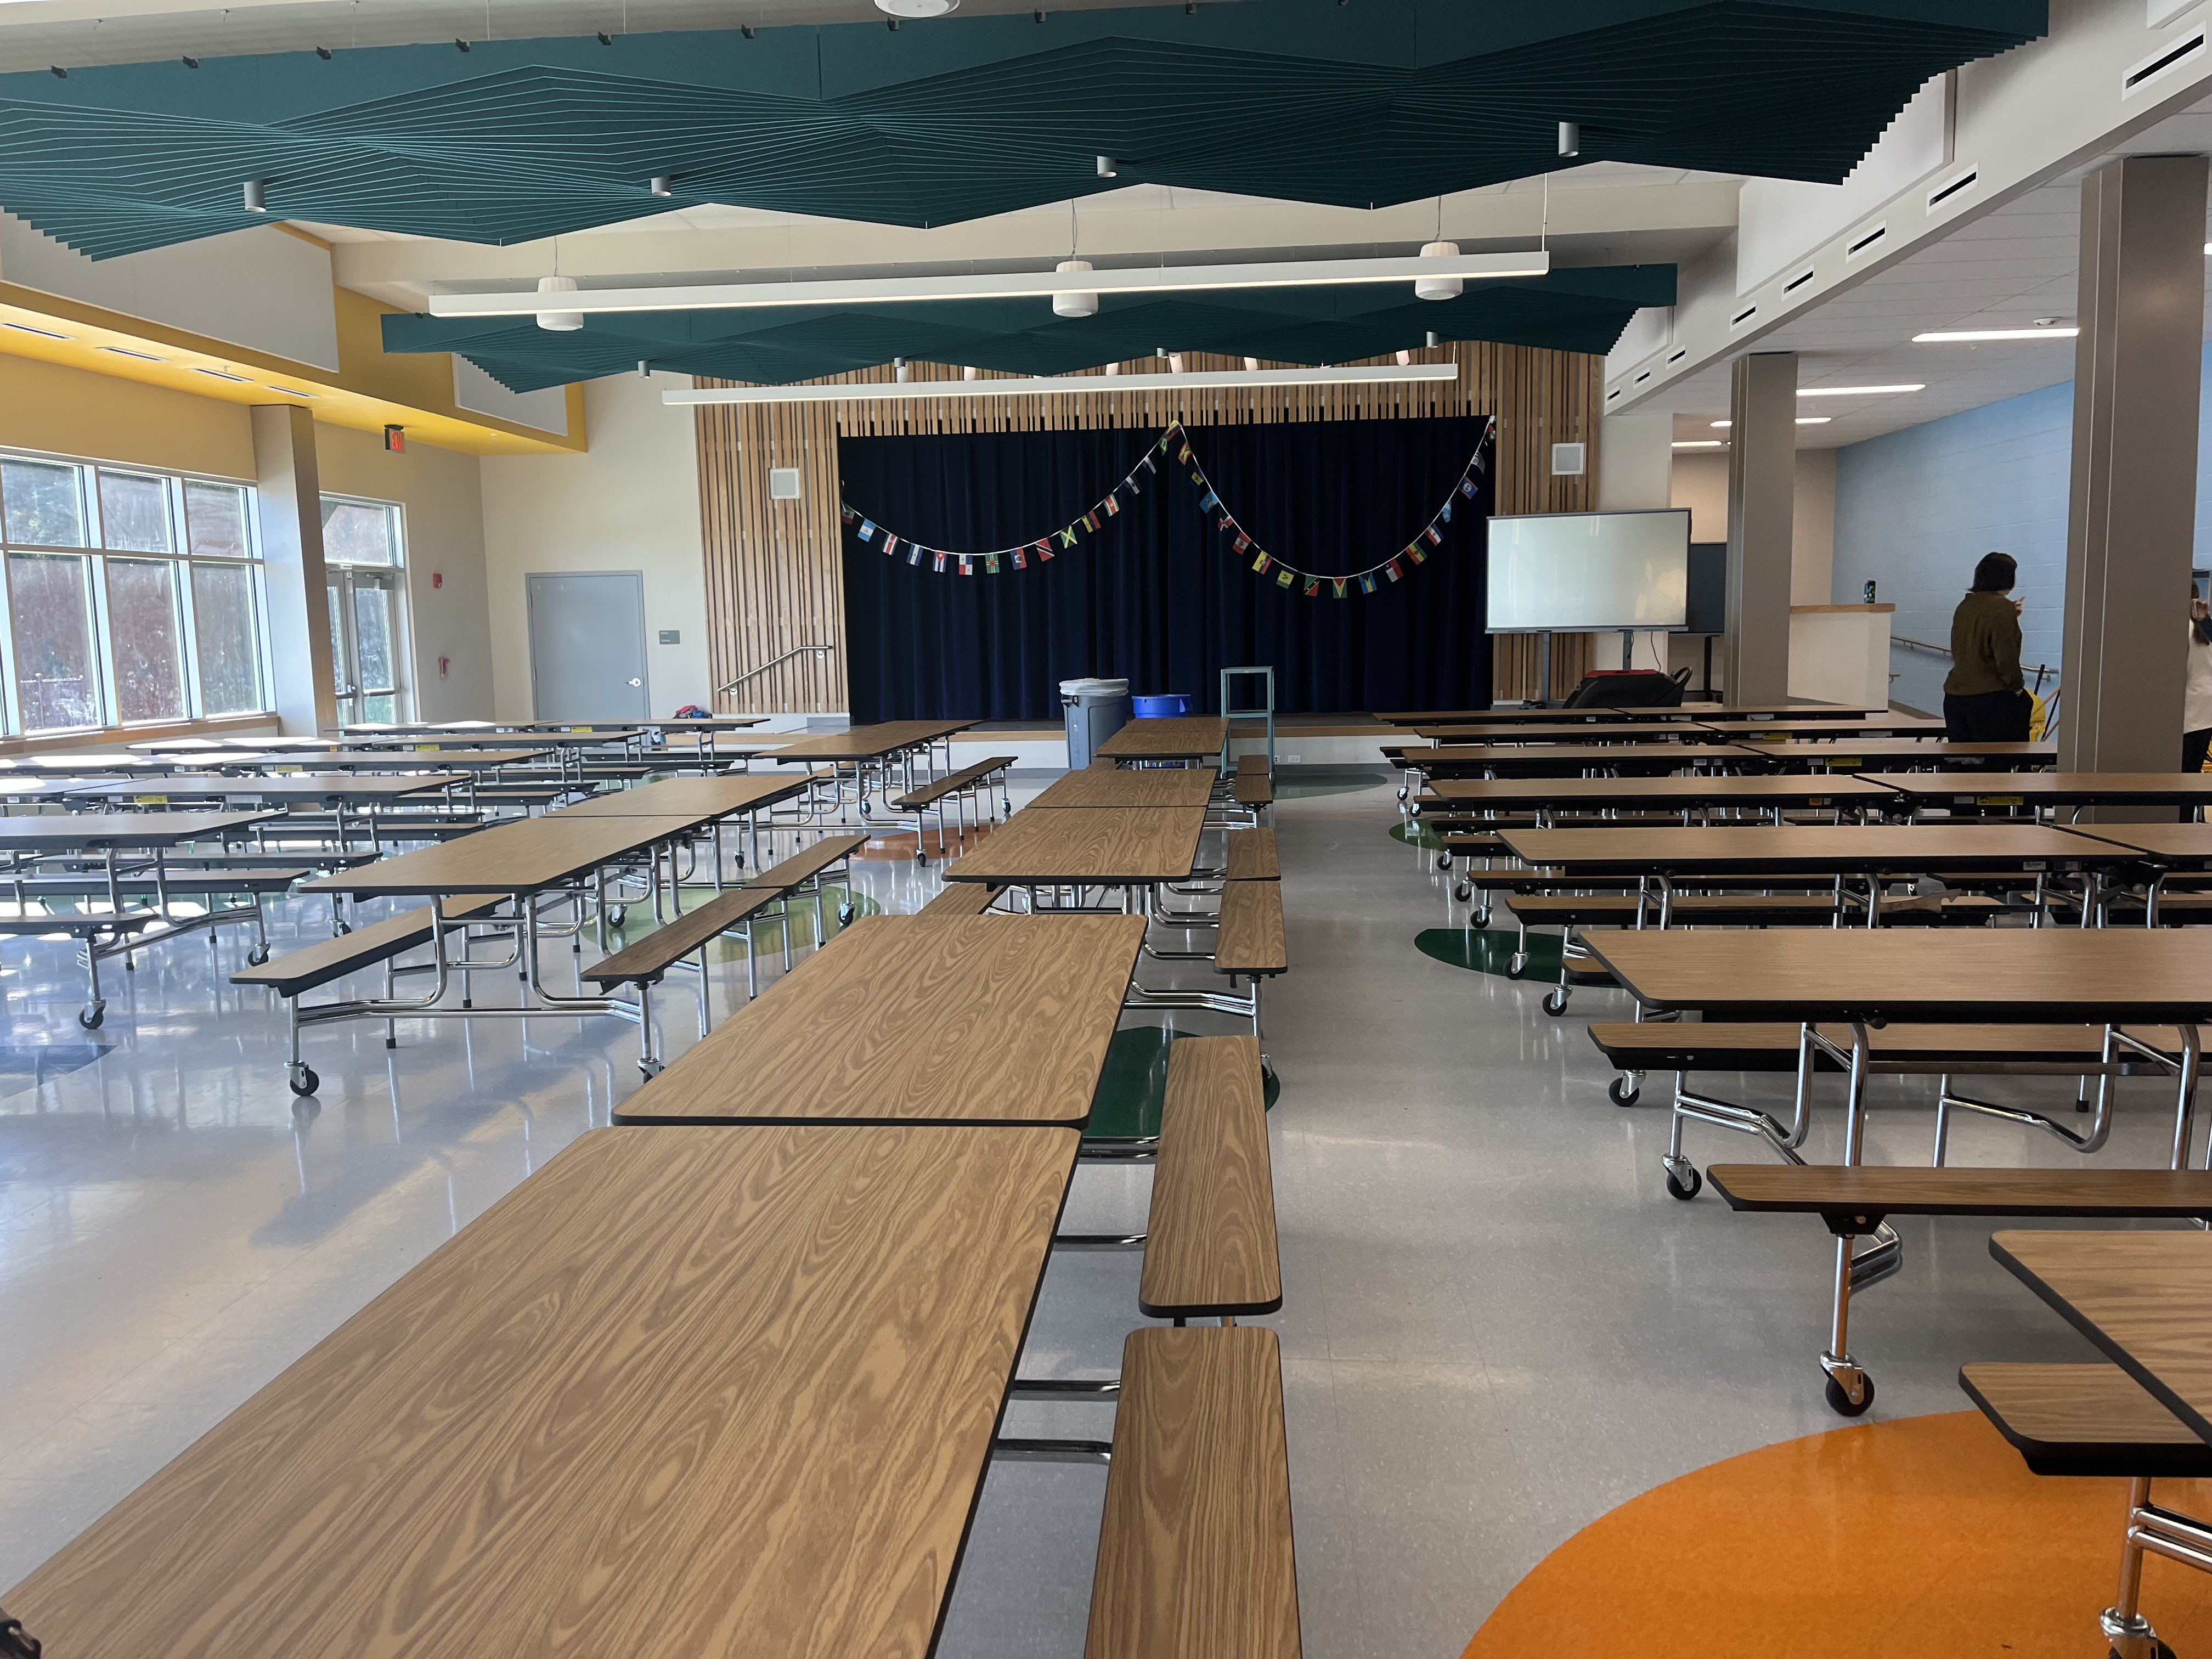 The cafeteria/all-purpose room has been enlarged to accommodate all 800 students for school-wide events.